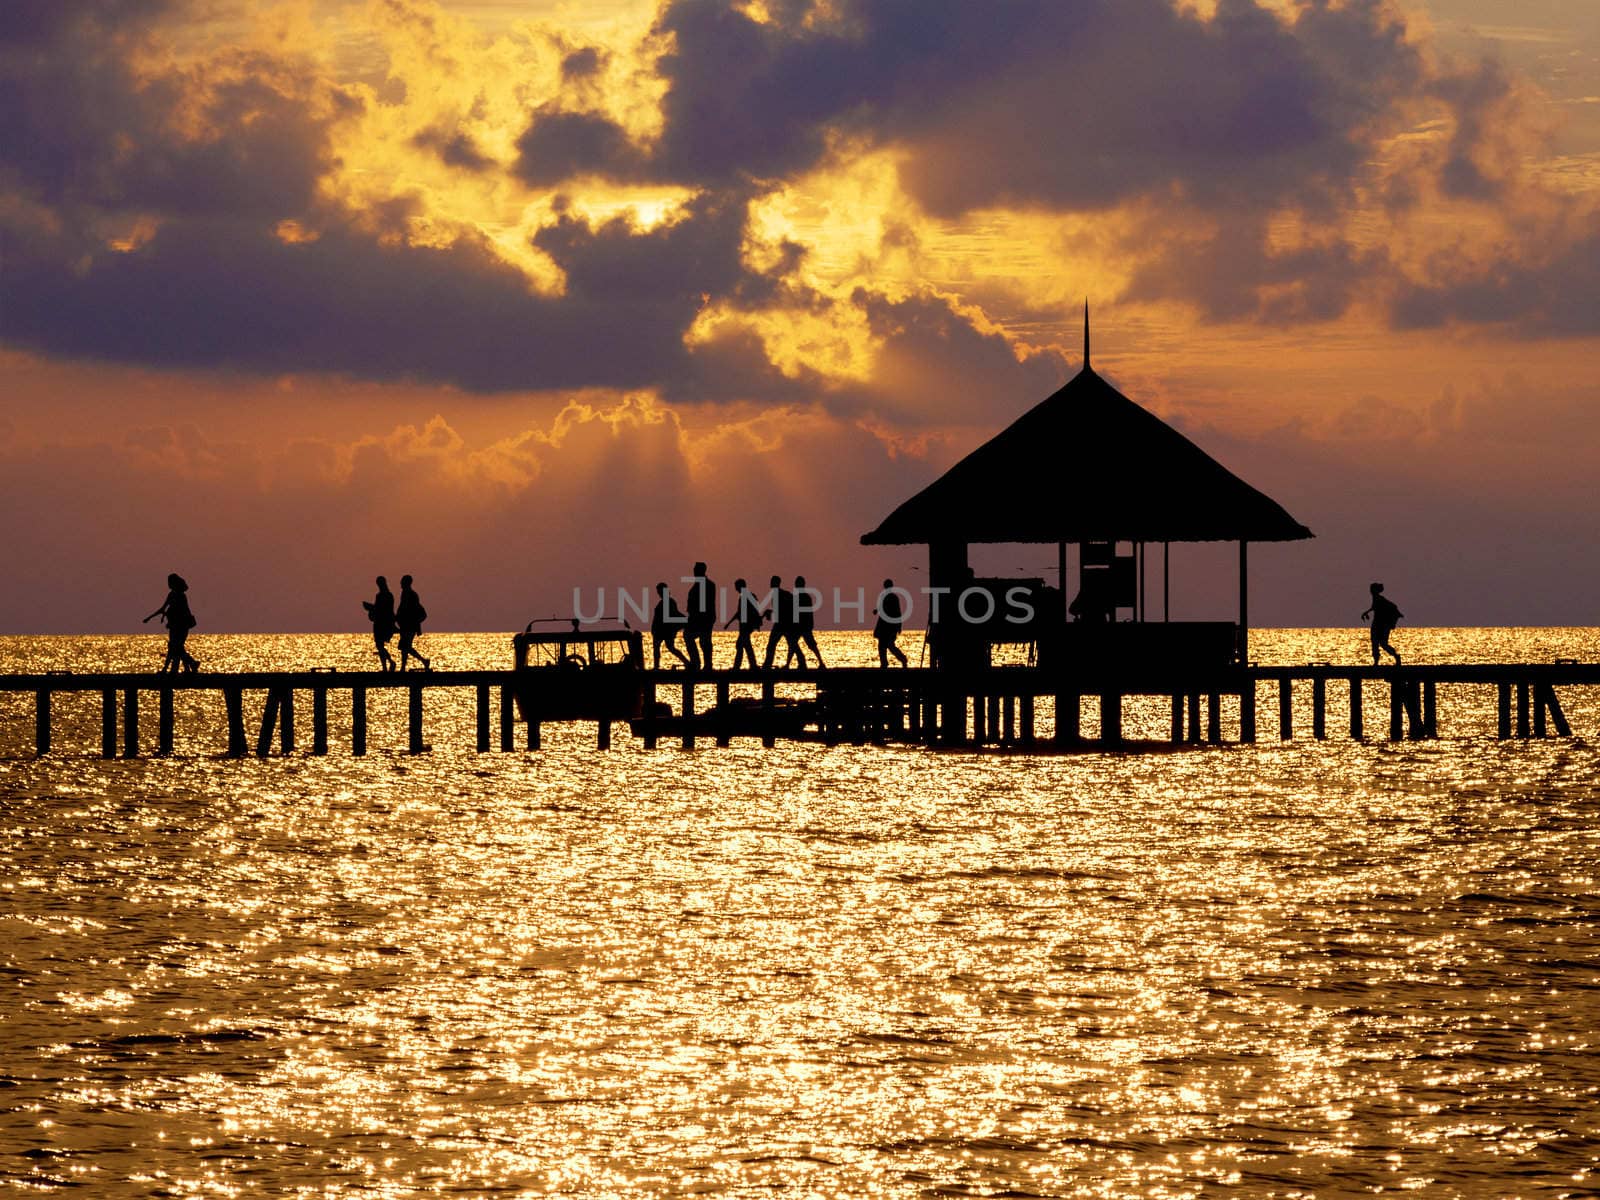 Boat dock in silhouette on small Indian ocean island